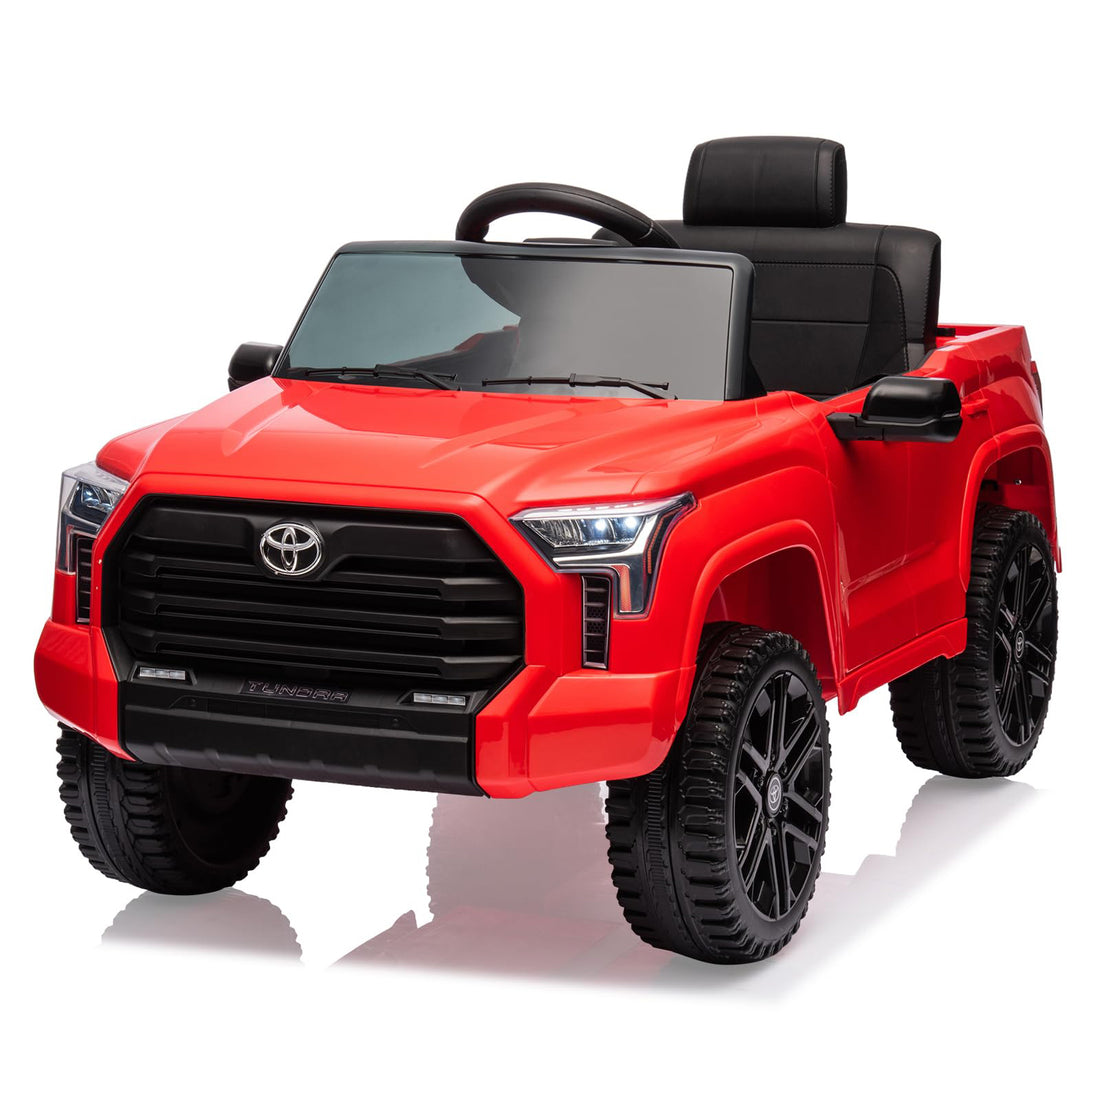 12V Ride on Car for Kids, Licensed Toyota Ride on Truck, Battery Powered Electric Car with Remote Control, MP3, LED Lights, Suspension System, Double Doors, Safety Belt, Ride On Toys for Boys Girls